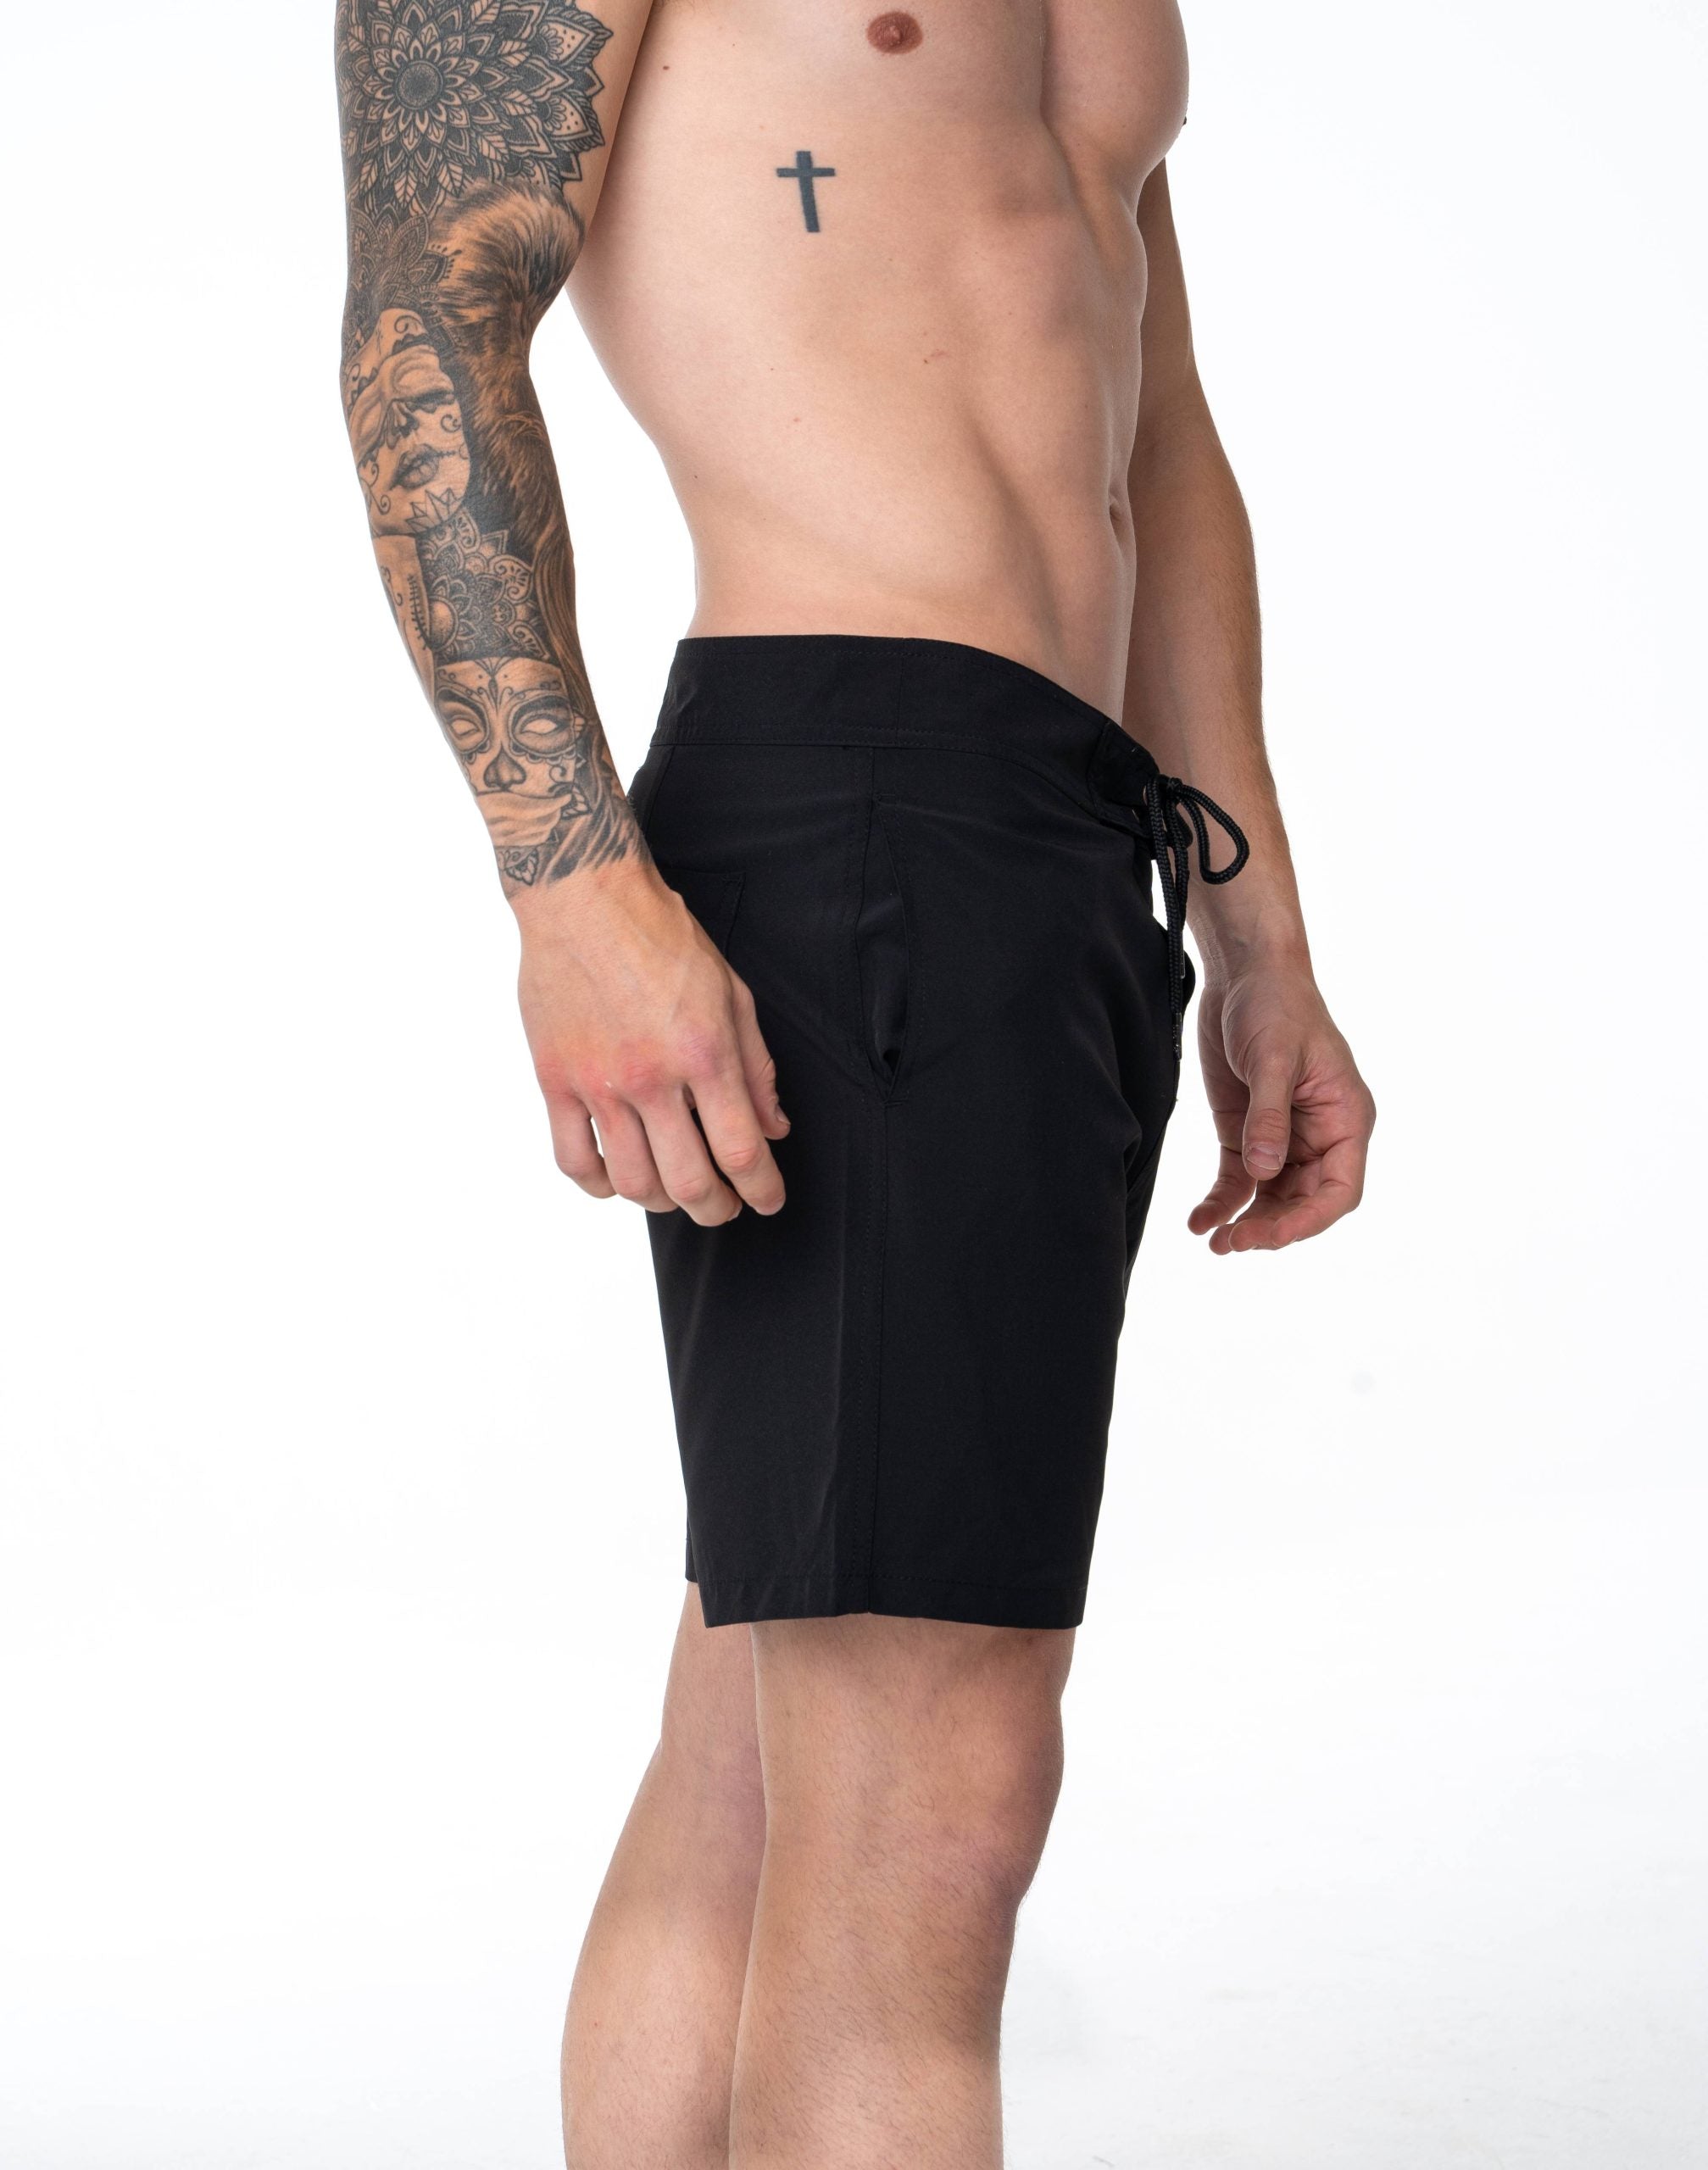 Sustainable Men's Black Board Shorts from SevenC's